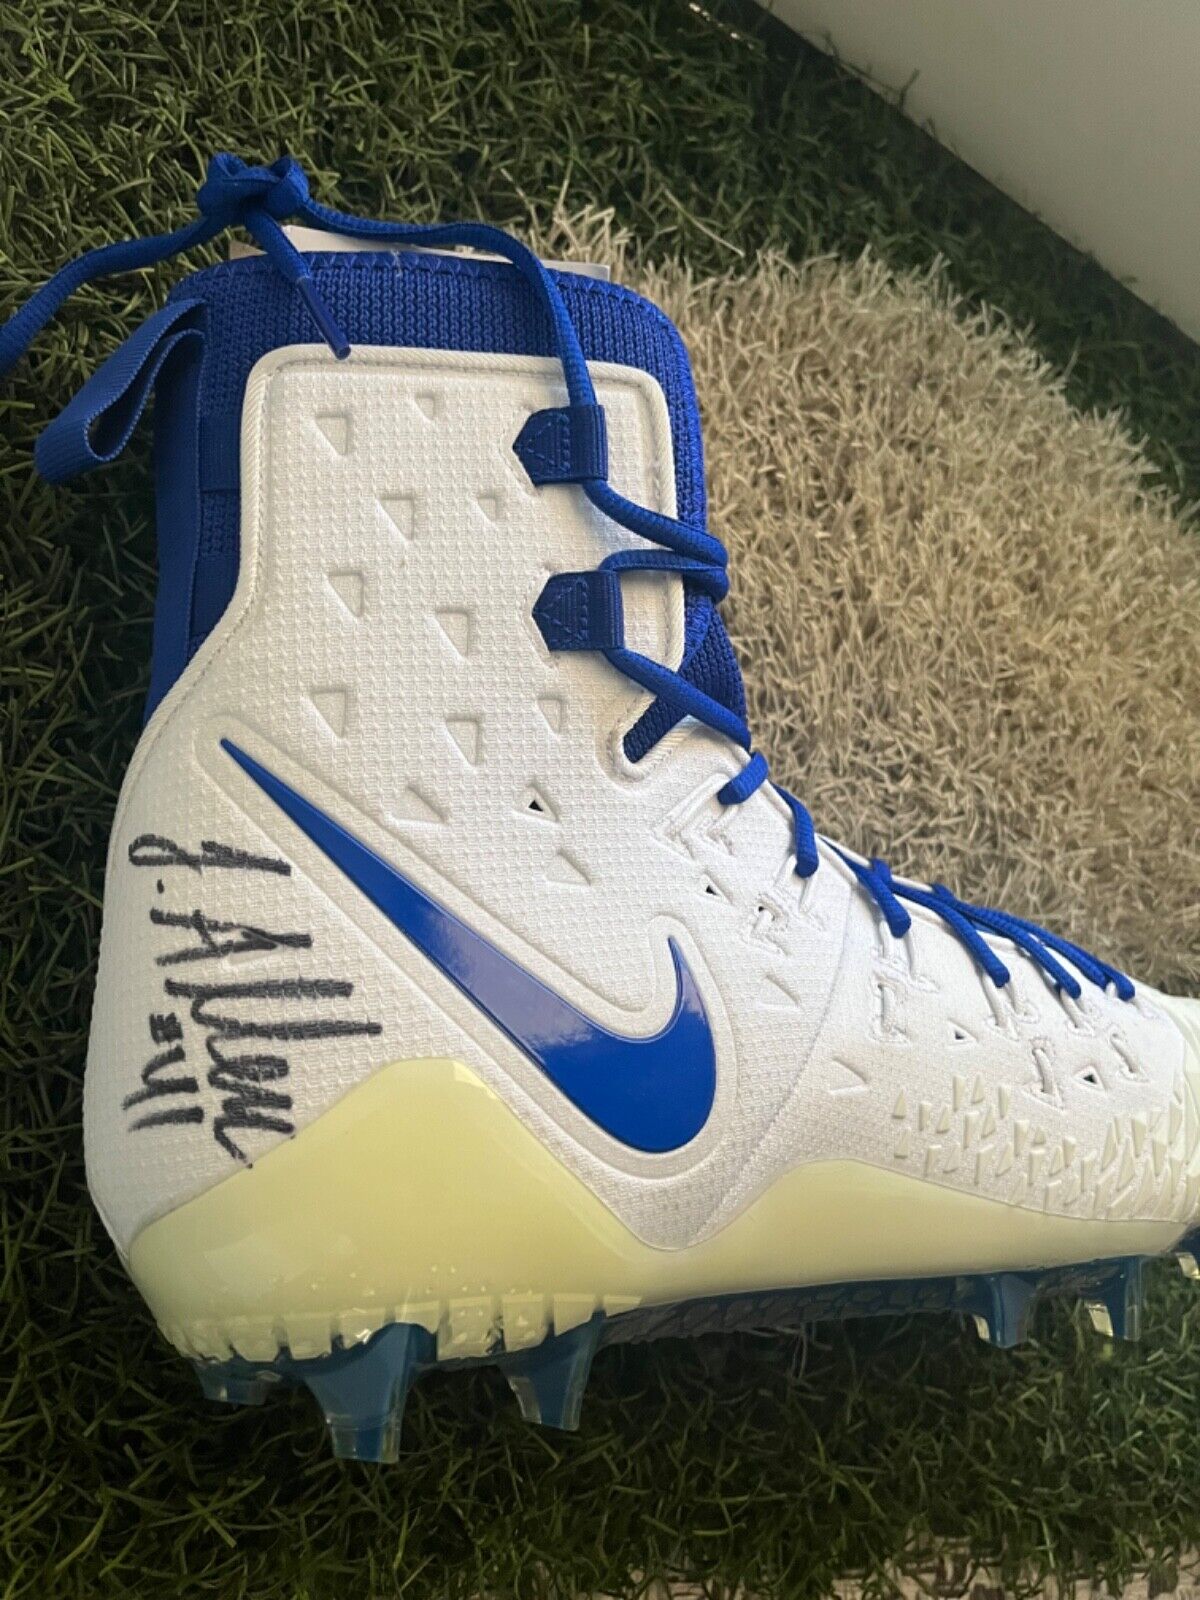 New- NFL Josh Allen autographed Authentic shoe white and blue Nike cleat